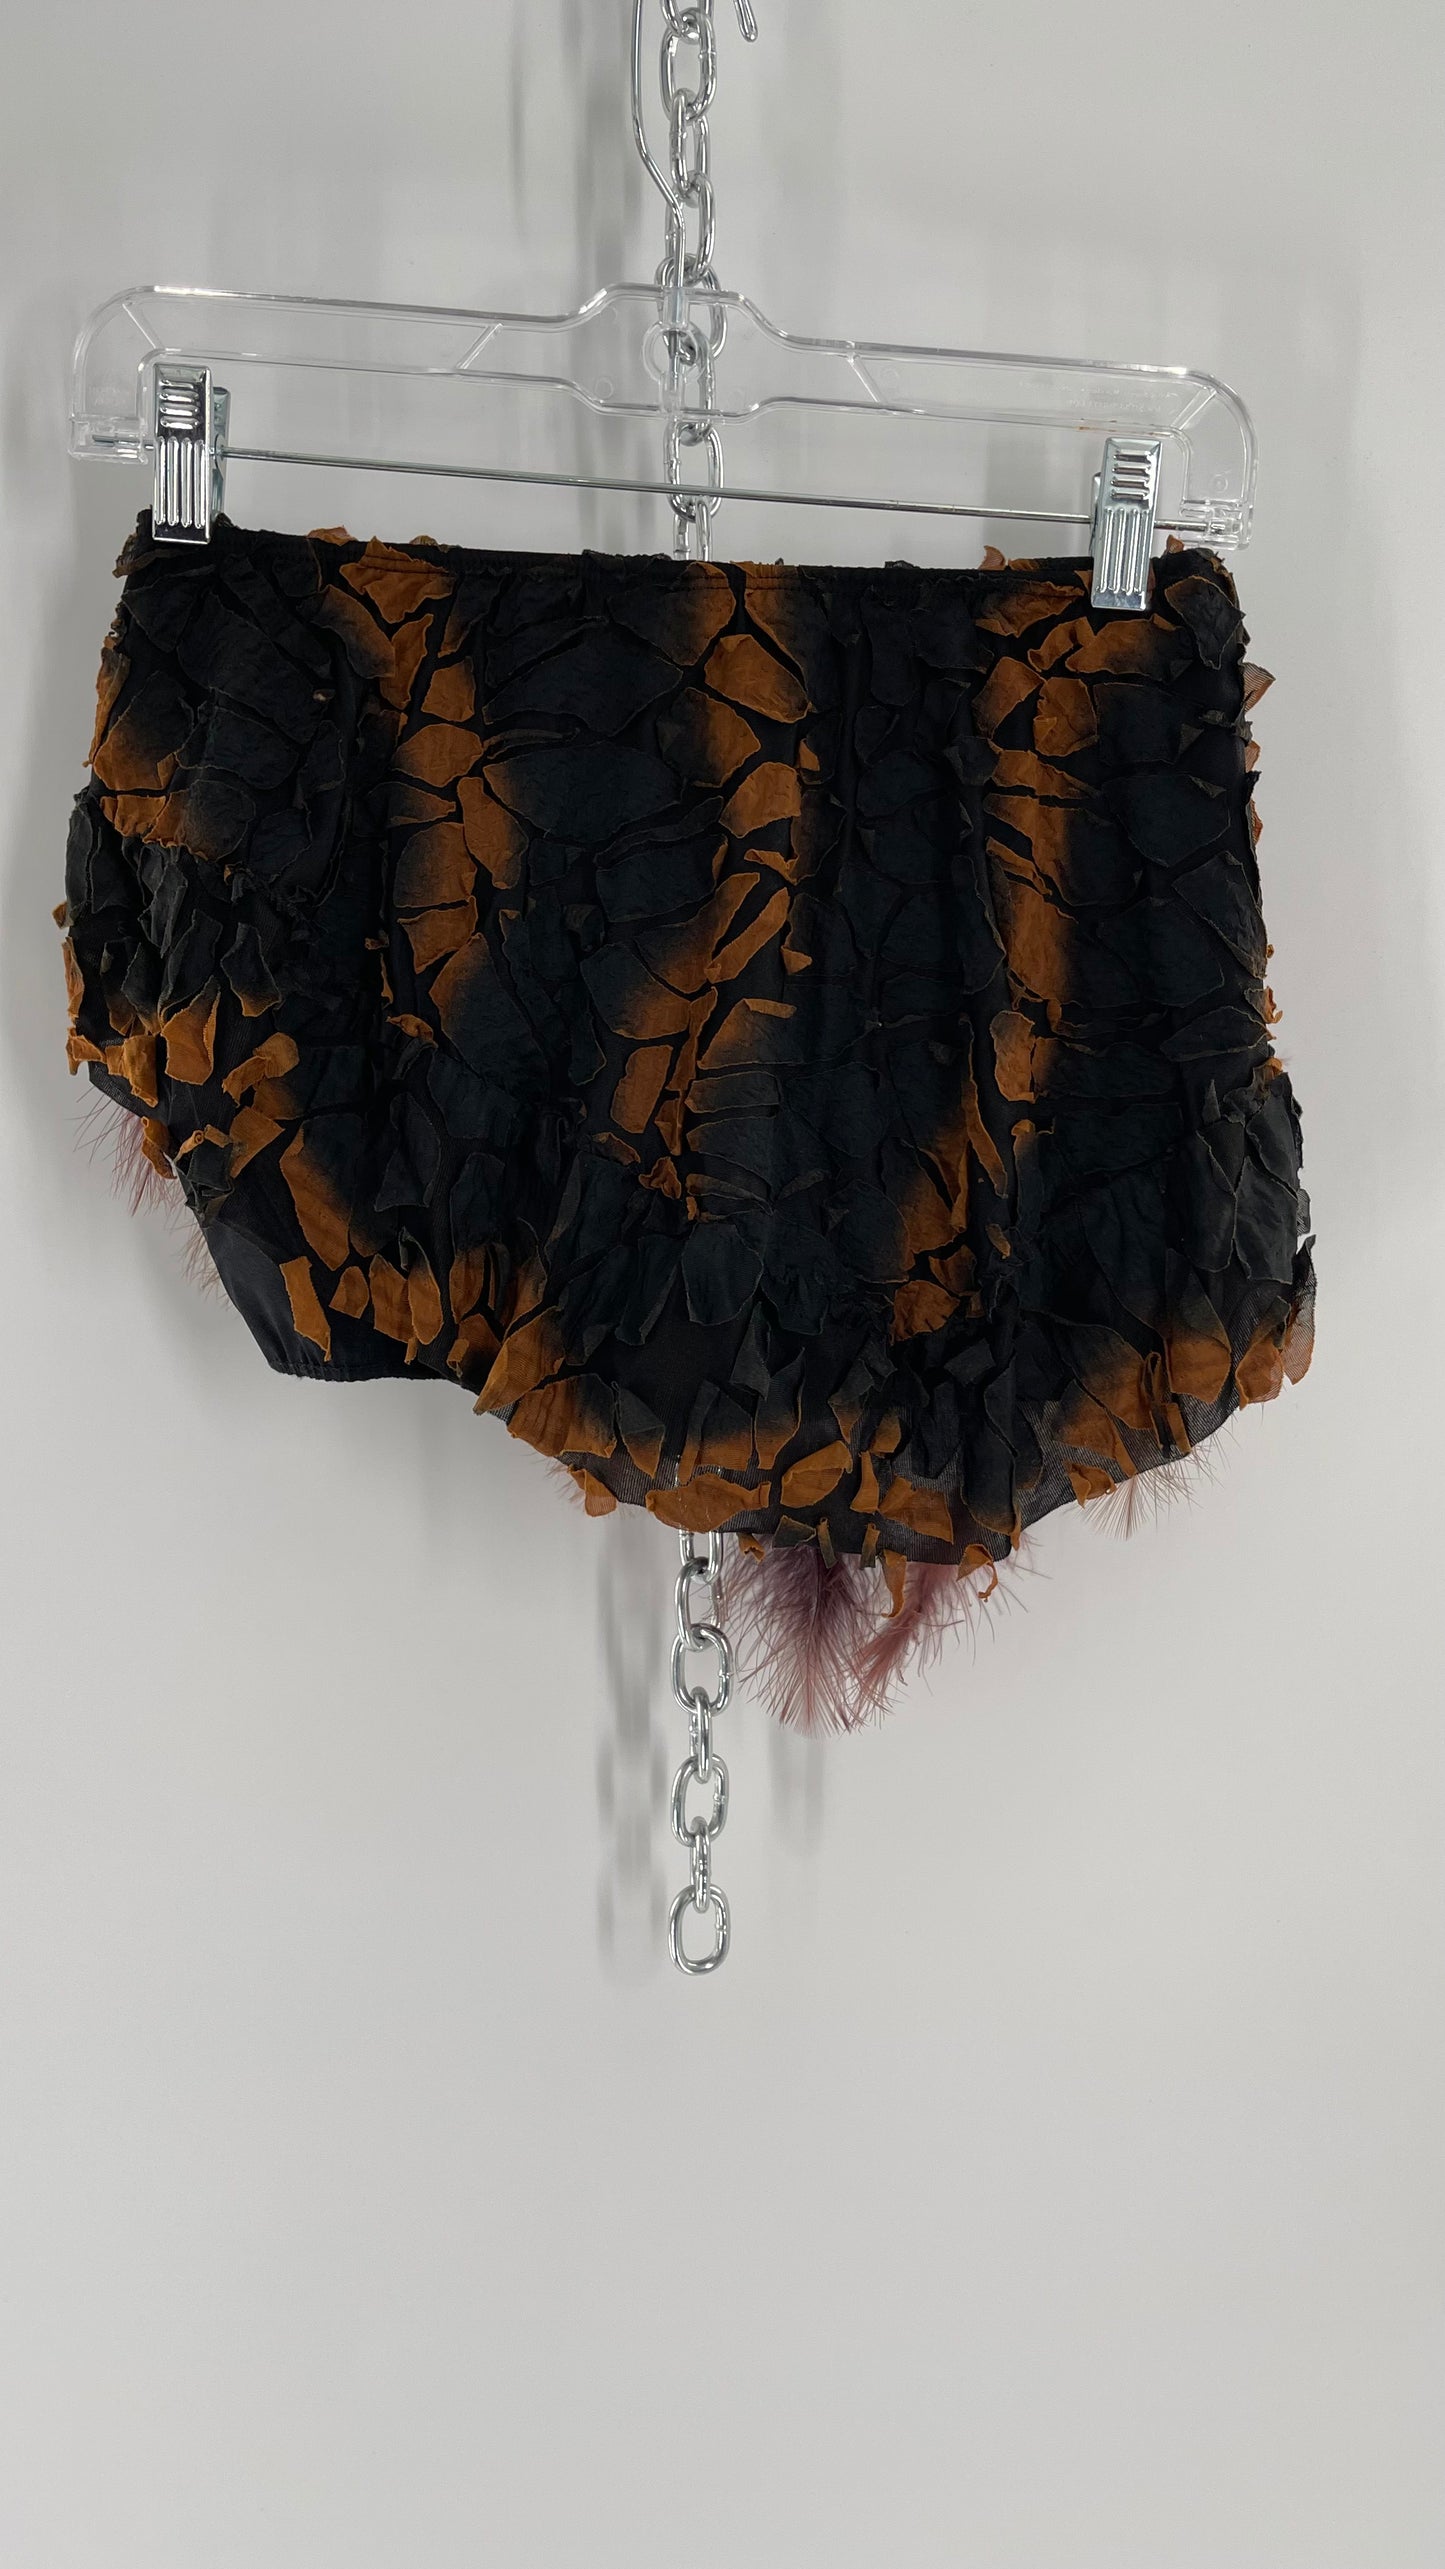 Vintage Micro Mini Skirt/ Skirt BeltWith Hidden Shorts, Textured Burnt Scale Fabric, and Feathered Asymmetric Hem (XS/S)